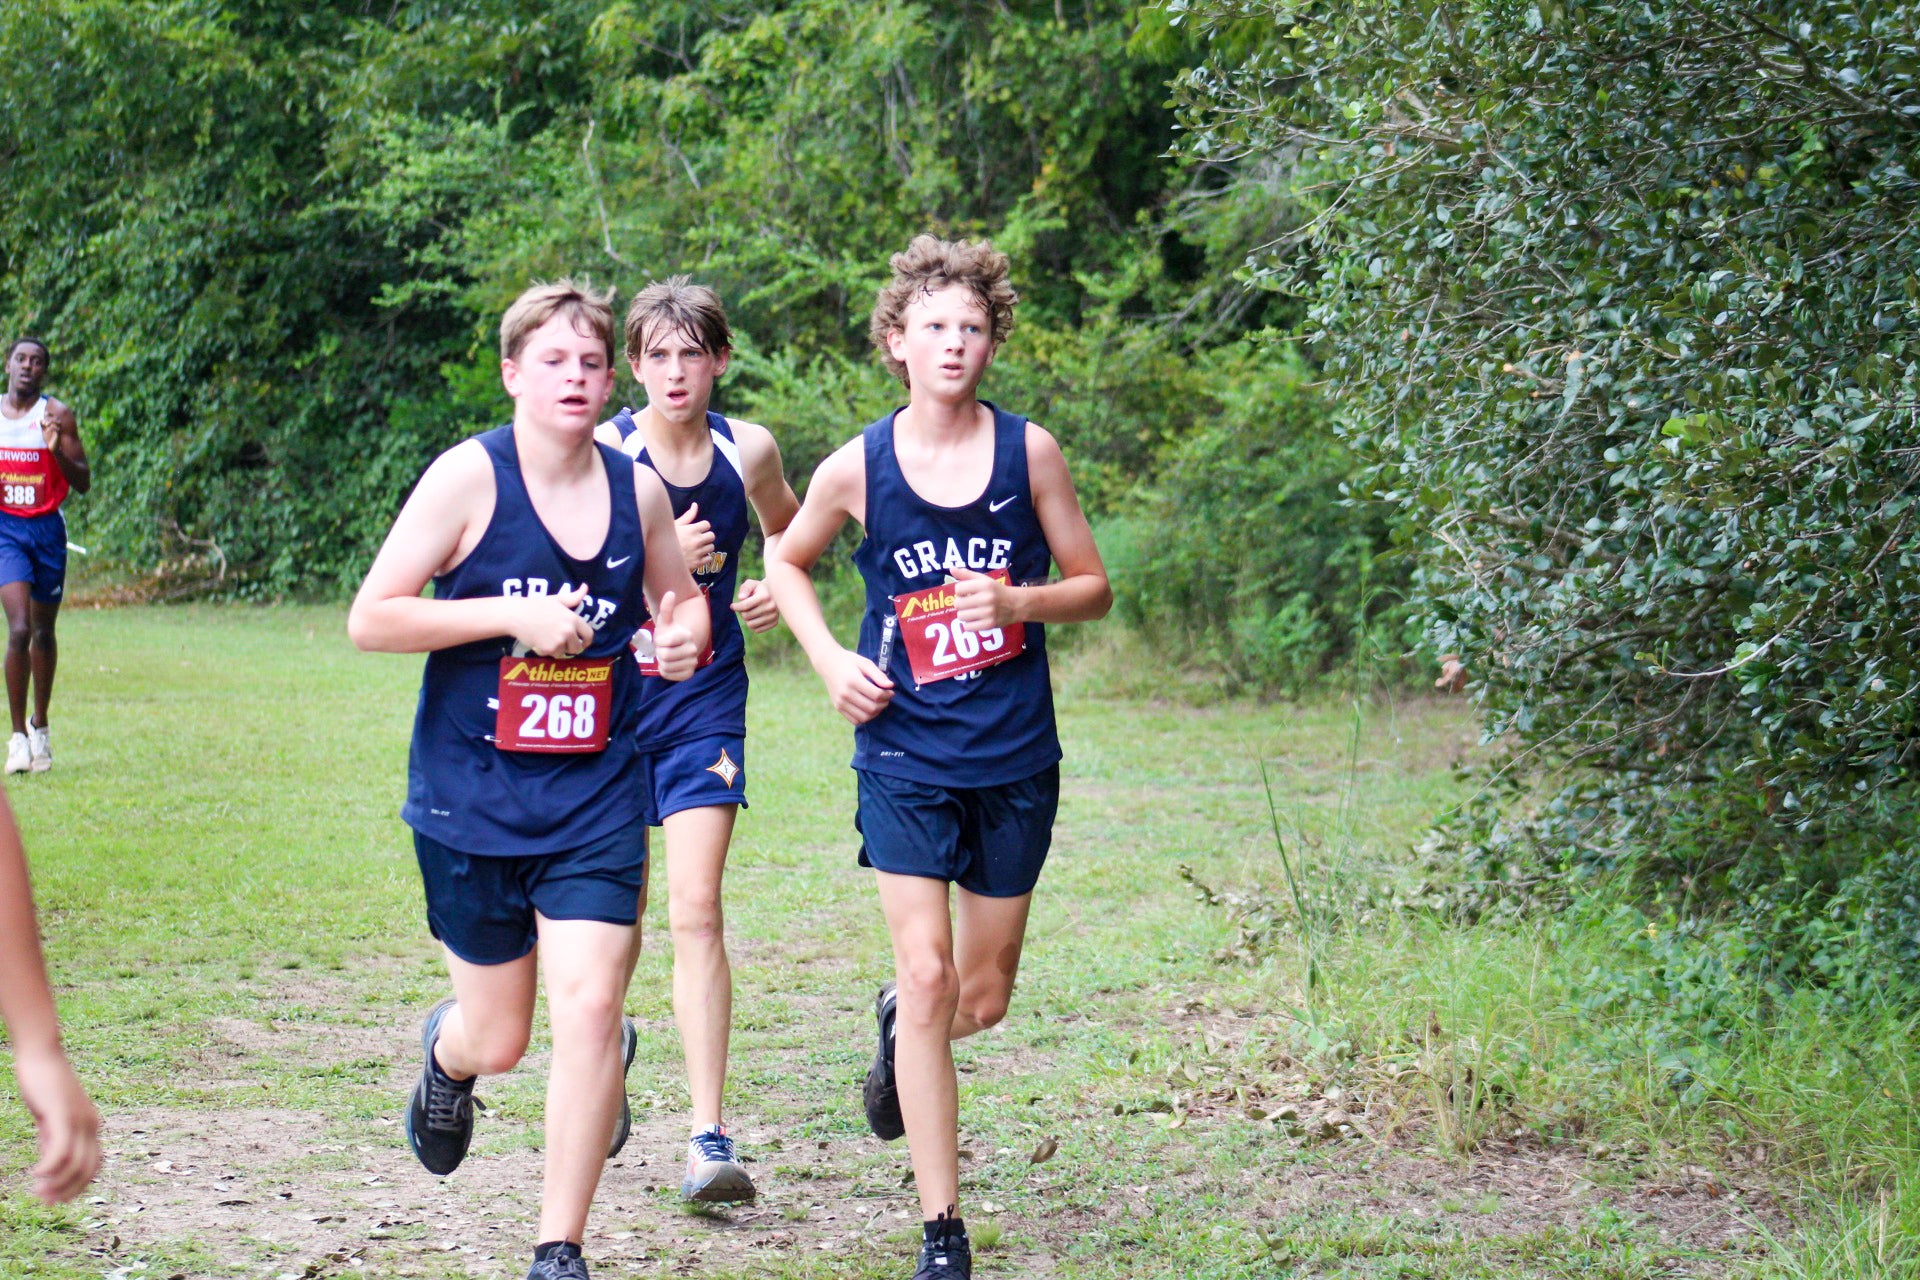 Walker Elrod and Tatiana Smith lead Cougars at Lee County Invitational